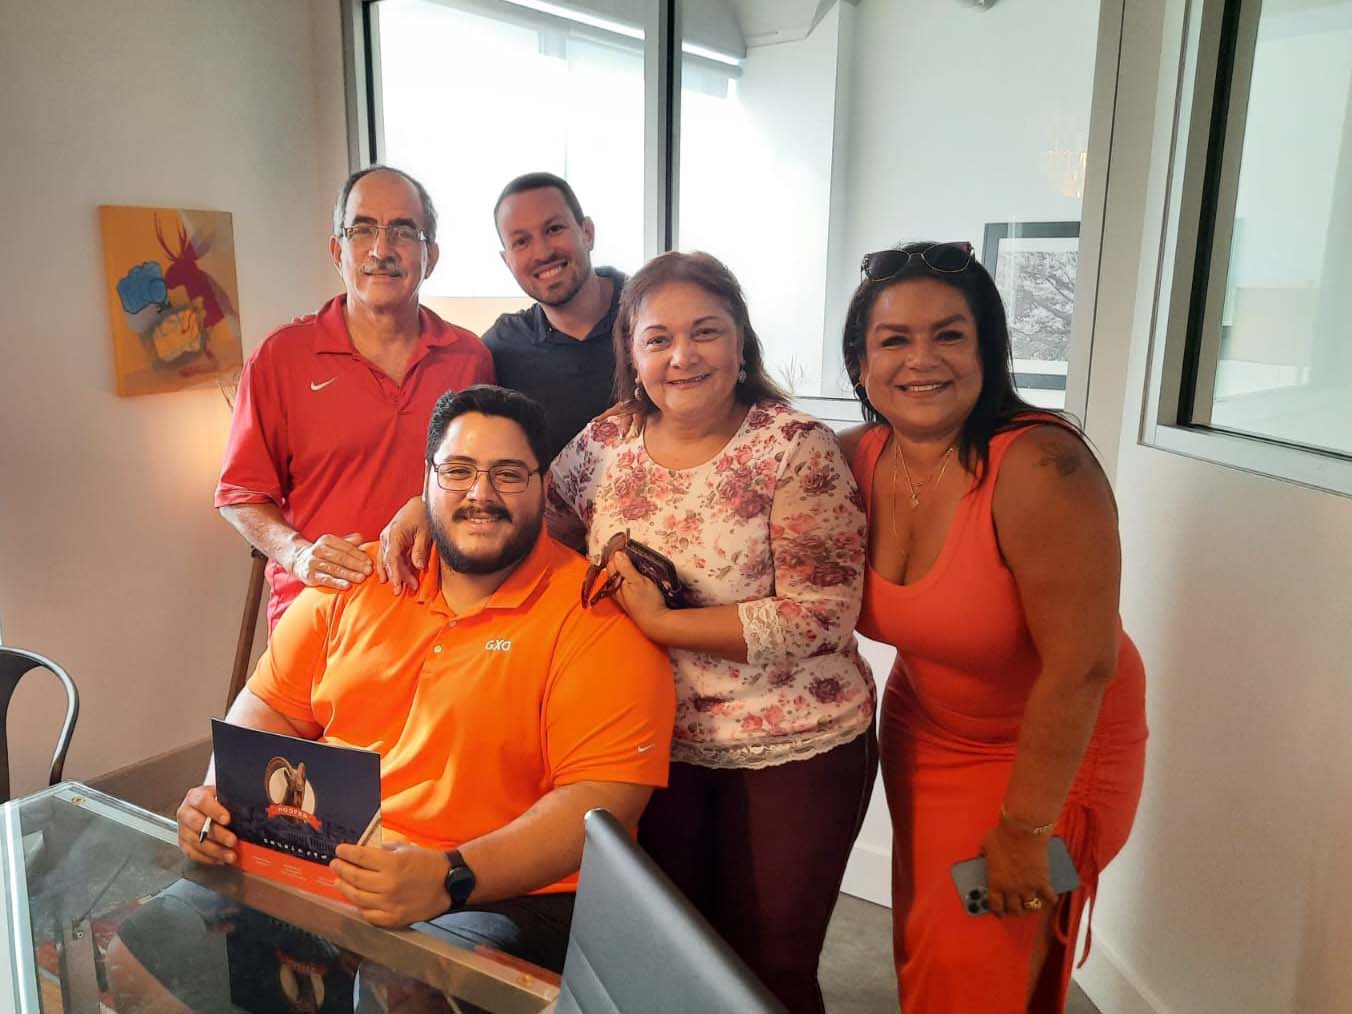 Felix Gil purchased a home using both IDA and DPA match savings funds. This image is of the day he signed, surrounded by his family.